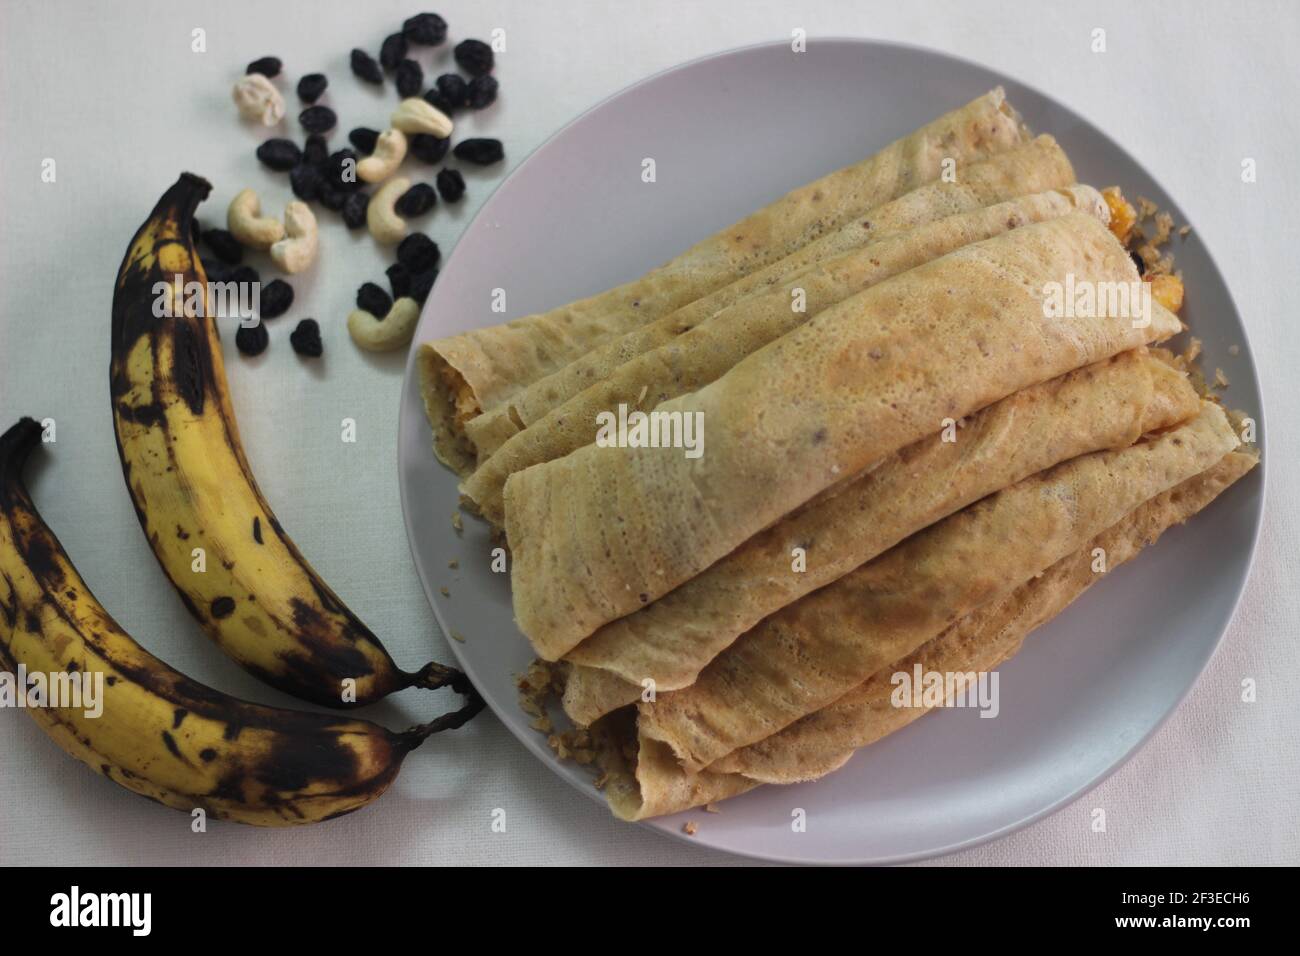 Home made Plantain Crepes or pancake with plantain coconut raisins mix in the middle. Shot on white background. Stock Photo